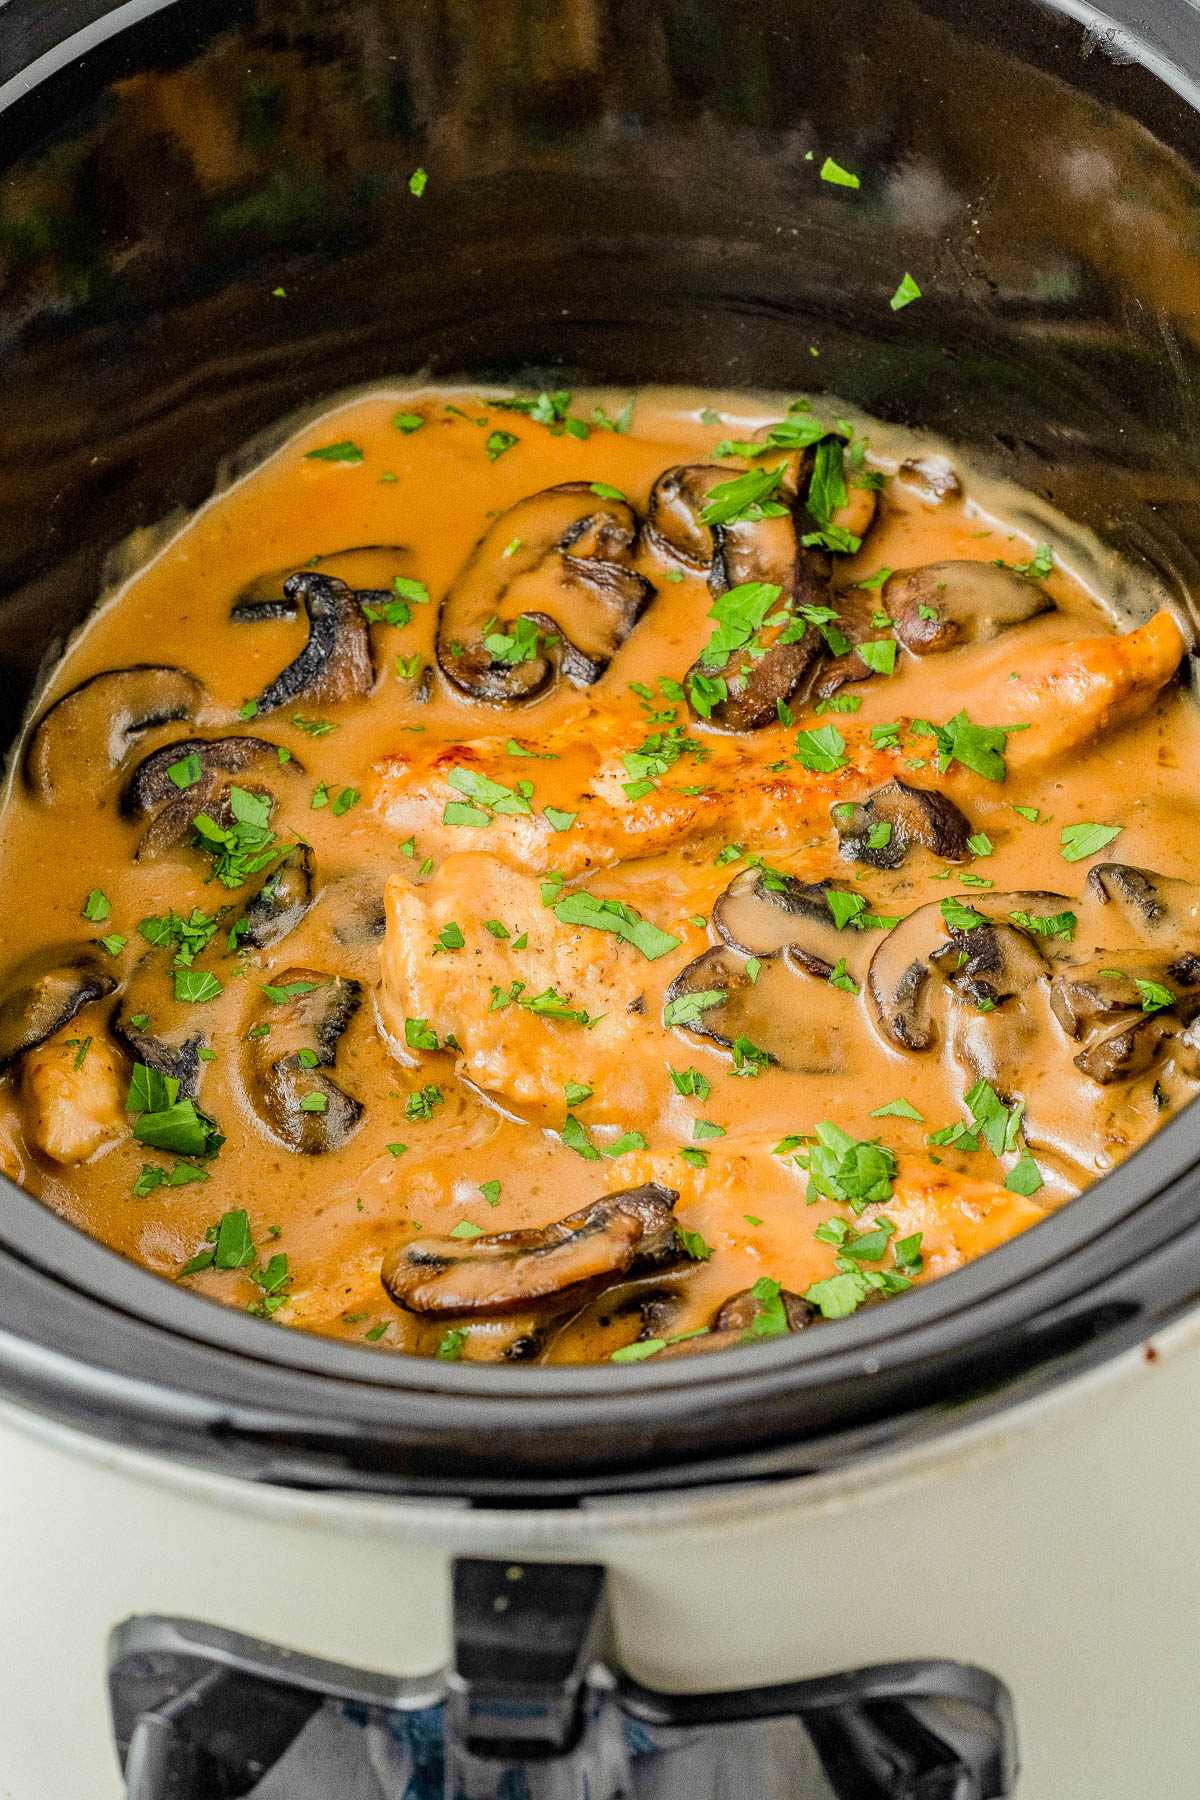 Slow Cooker Chicken Marsala – This classic comfort food recipe is complete with tender chicken breasts that are slow cooked with mushrooms and herbs in a flavorful creamy Marsala wine sauce! The rich sauce makes the perfect gravy served over rice or potatoes. Learn to make this restaurant quality dish at home in your Crock-Pot so that it's EASY enough for weeknight dinners!